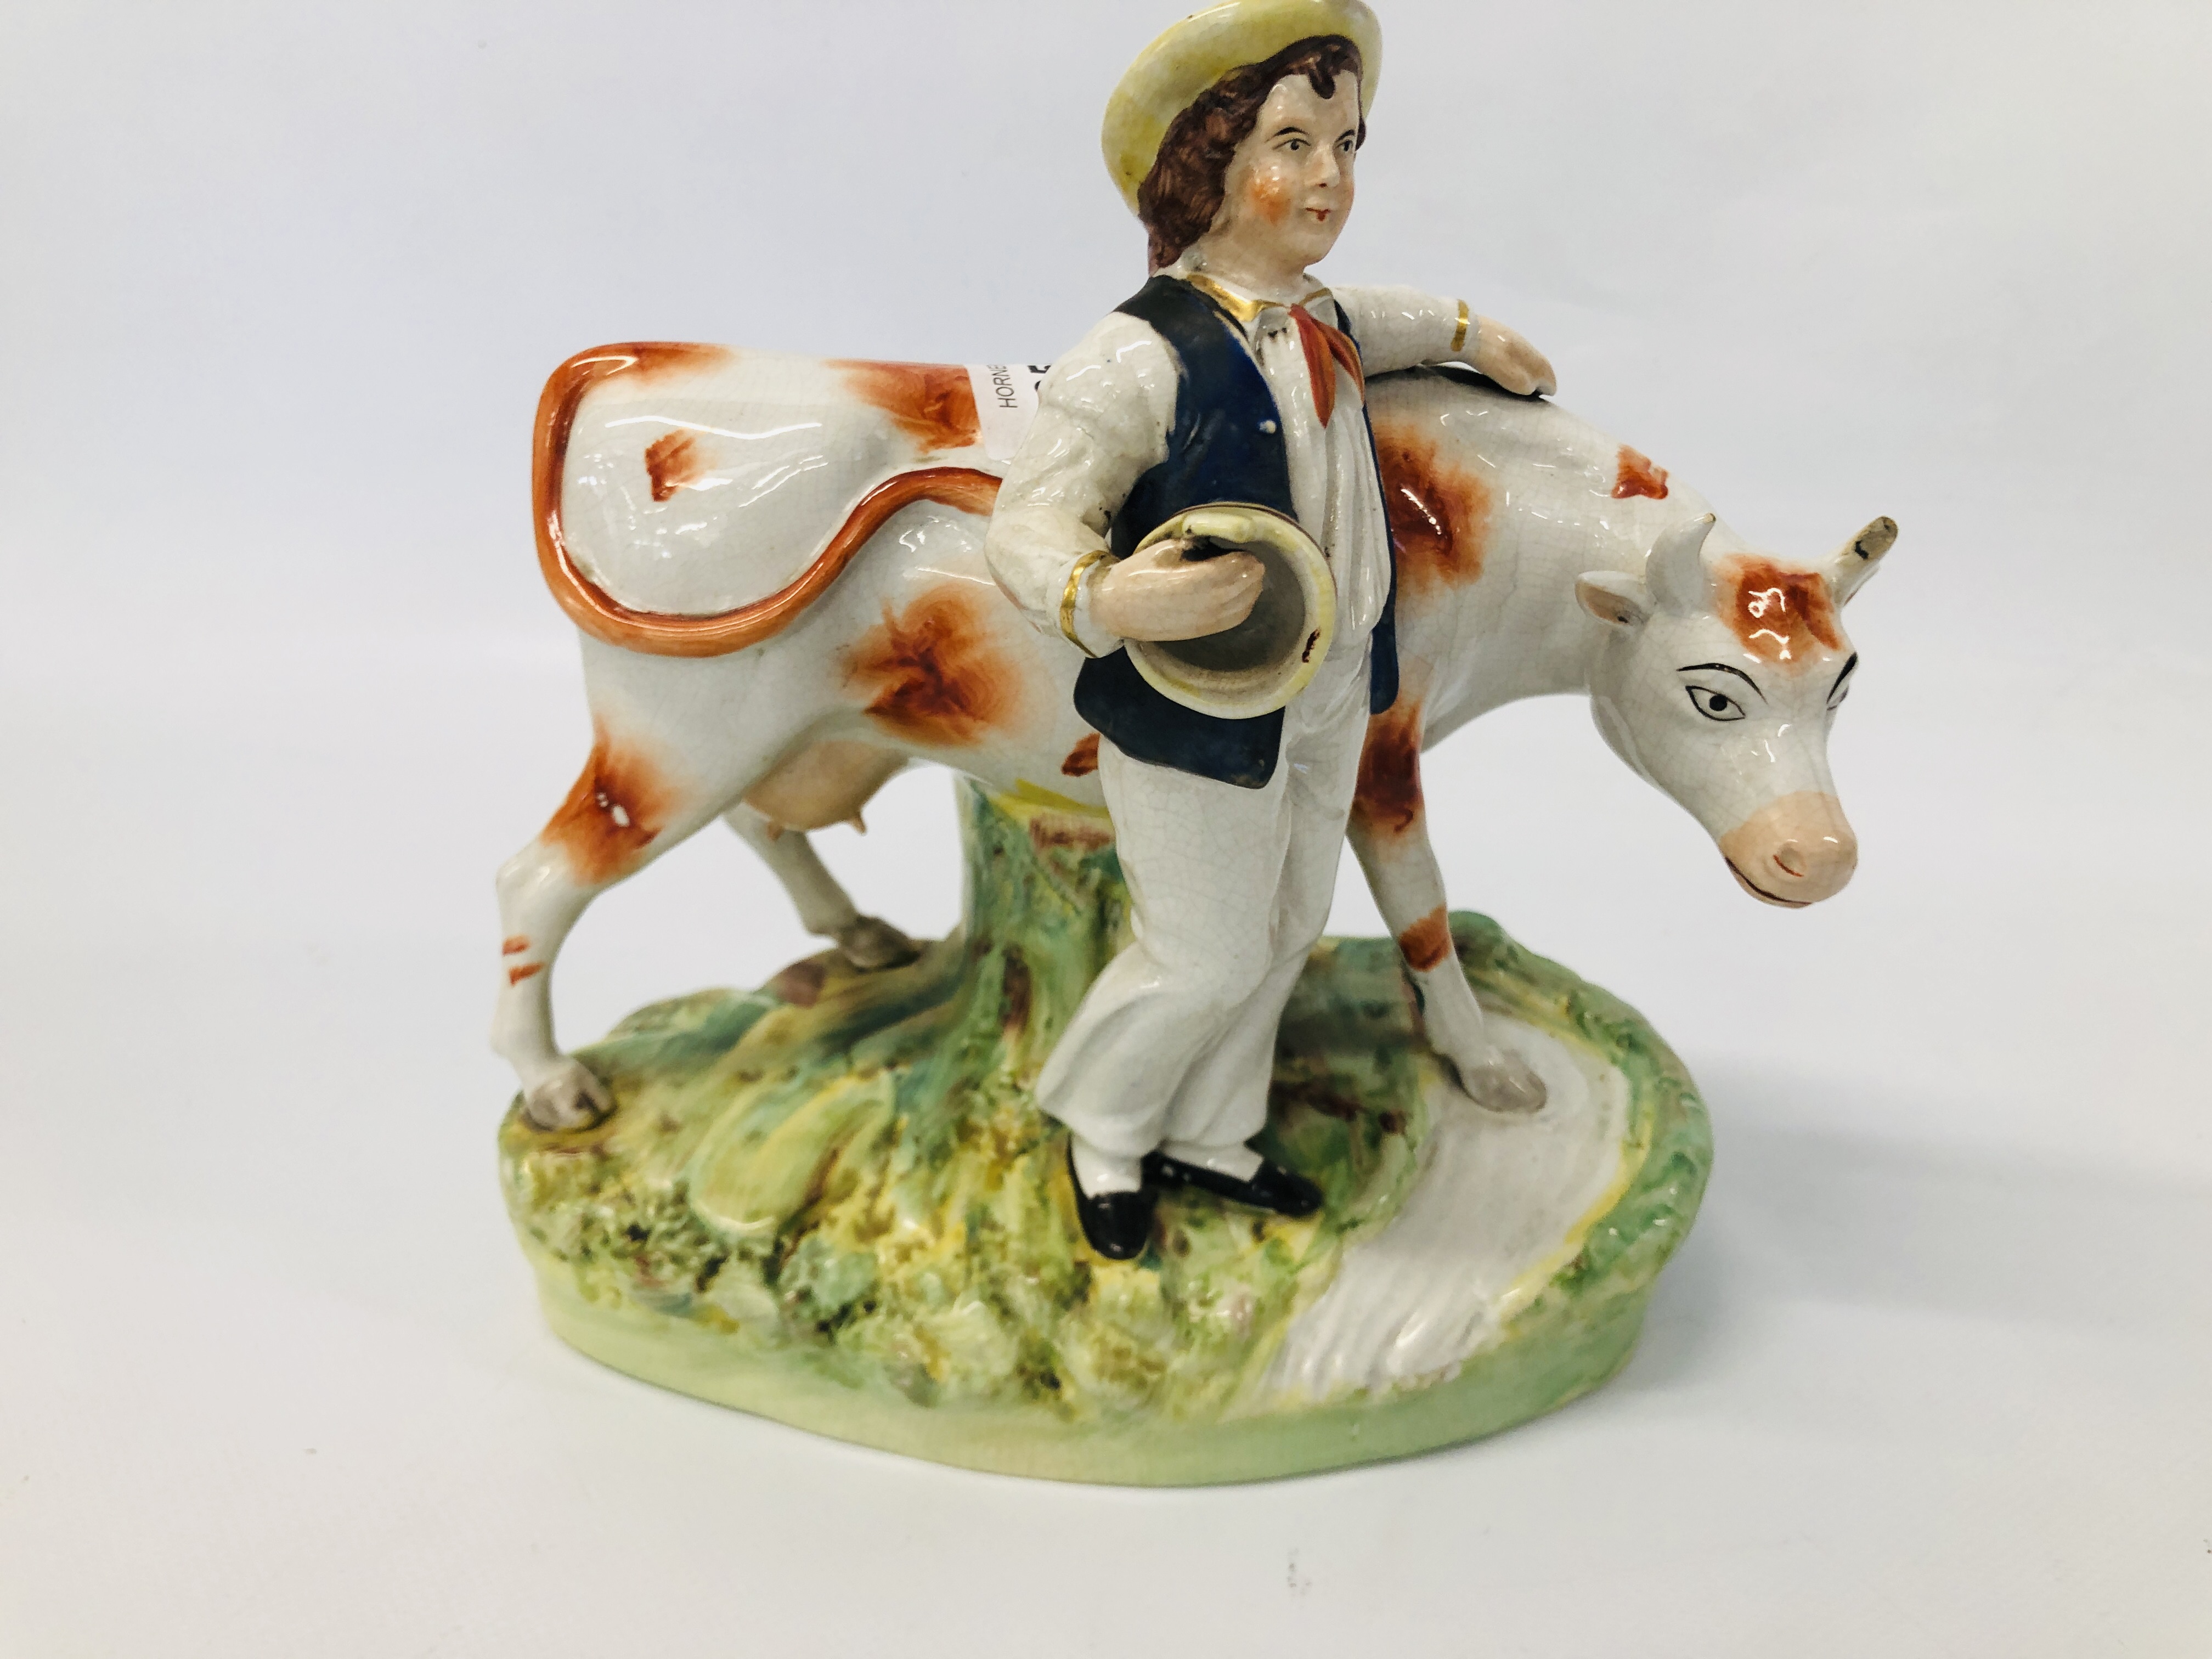 PAIR OF STAFFORDSHIRE TYPE FIGURES OF A MILK MAID AND A BOY STANDING BY A COW A/F HEIGHT 21CM. - Image 7 of 8